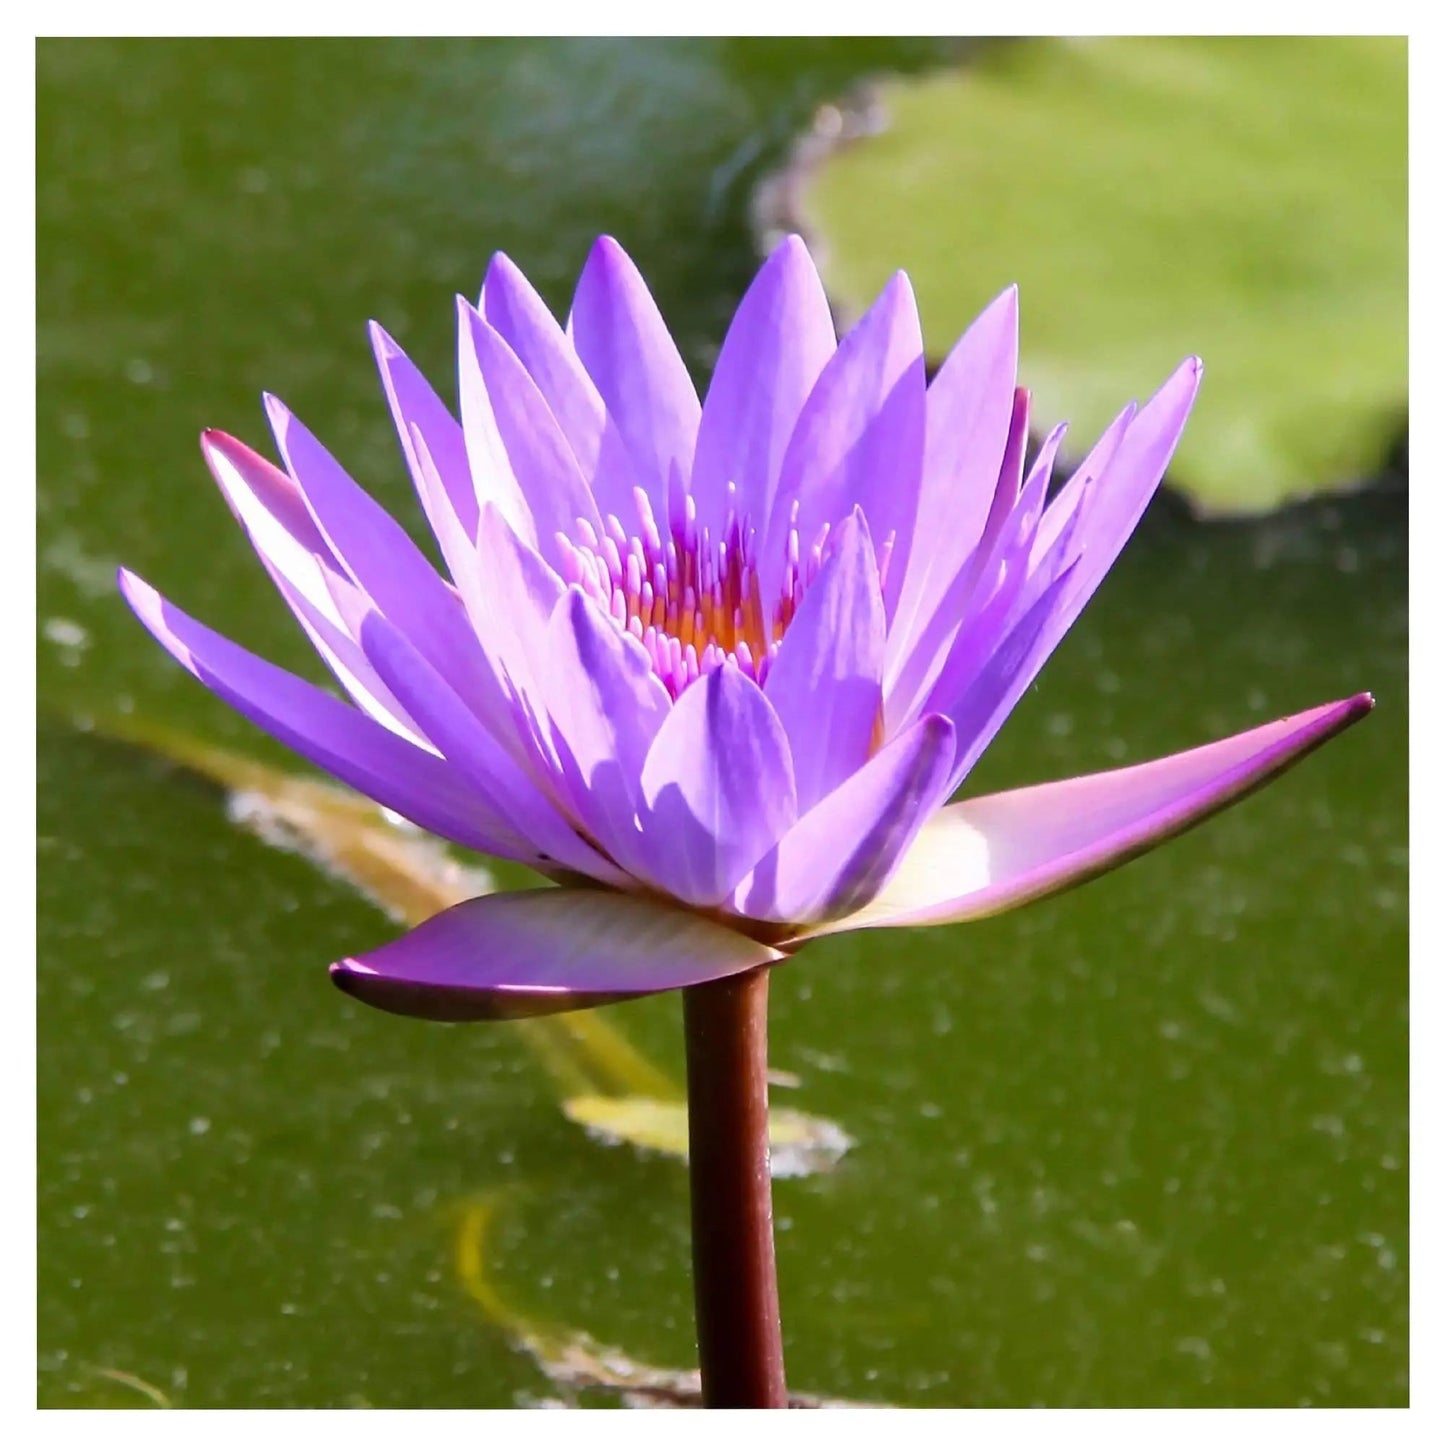 close-up of lilac water lilly floating on pond by Lisa Blount